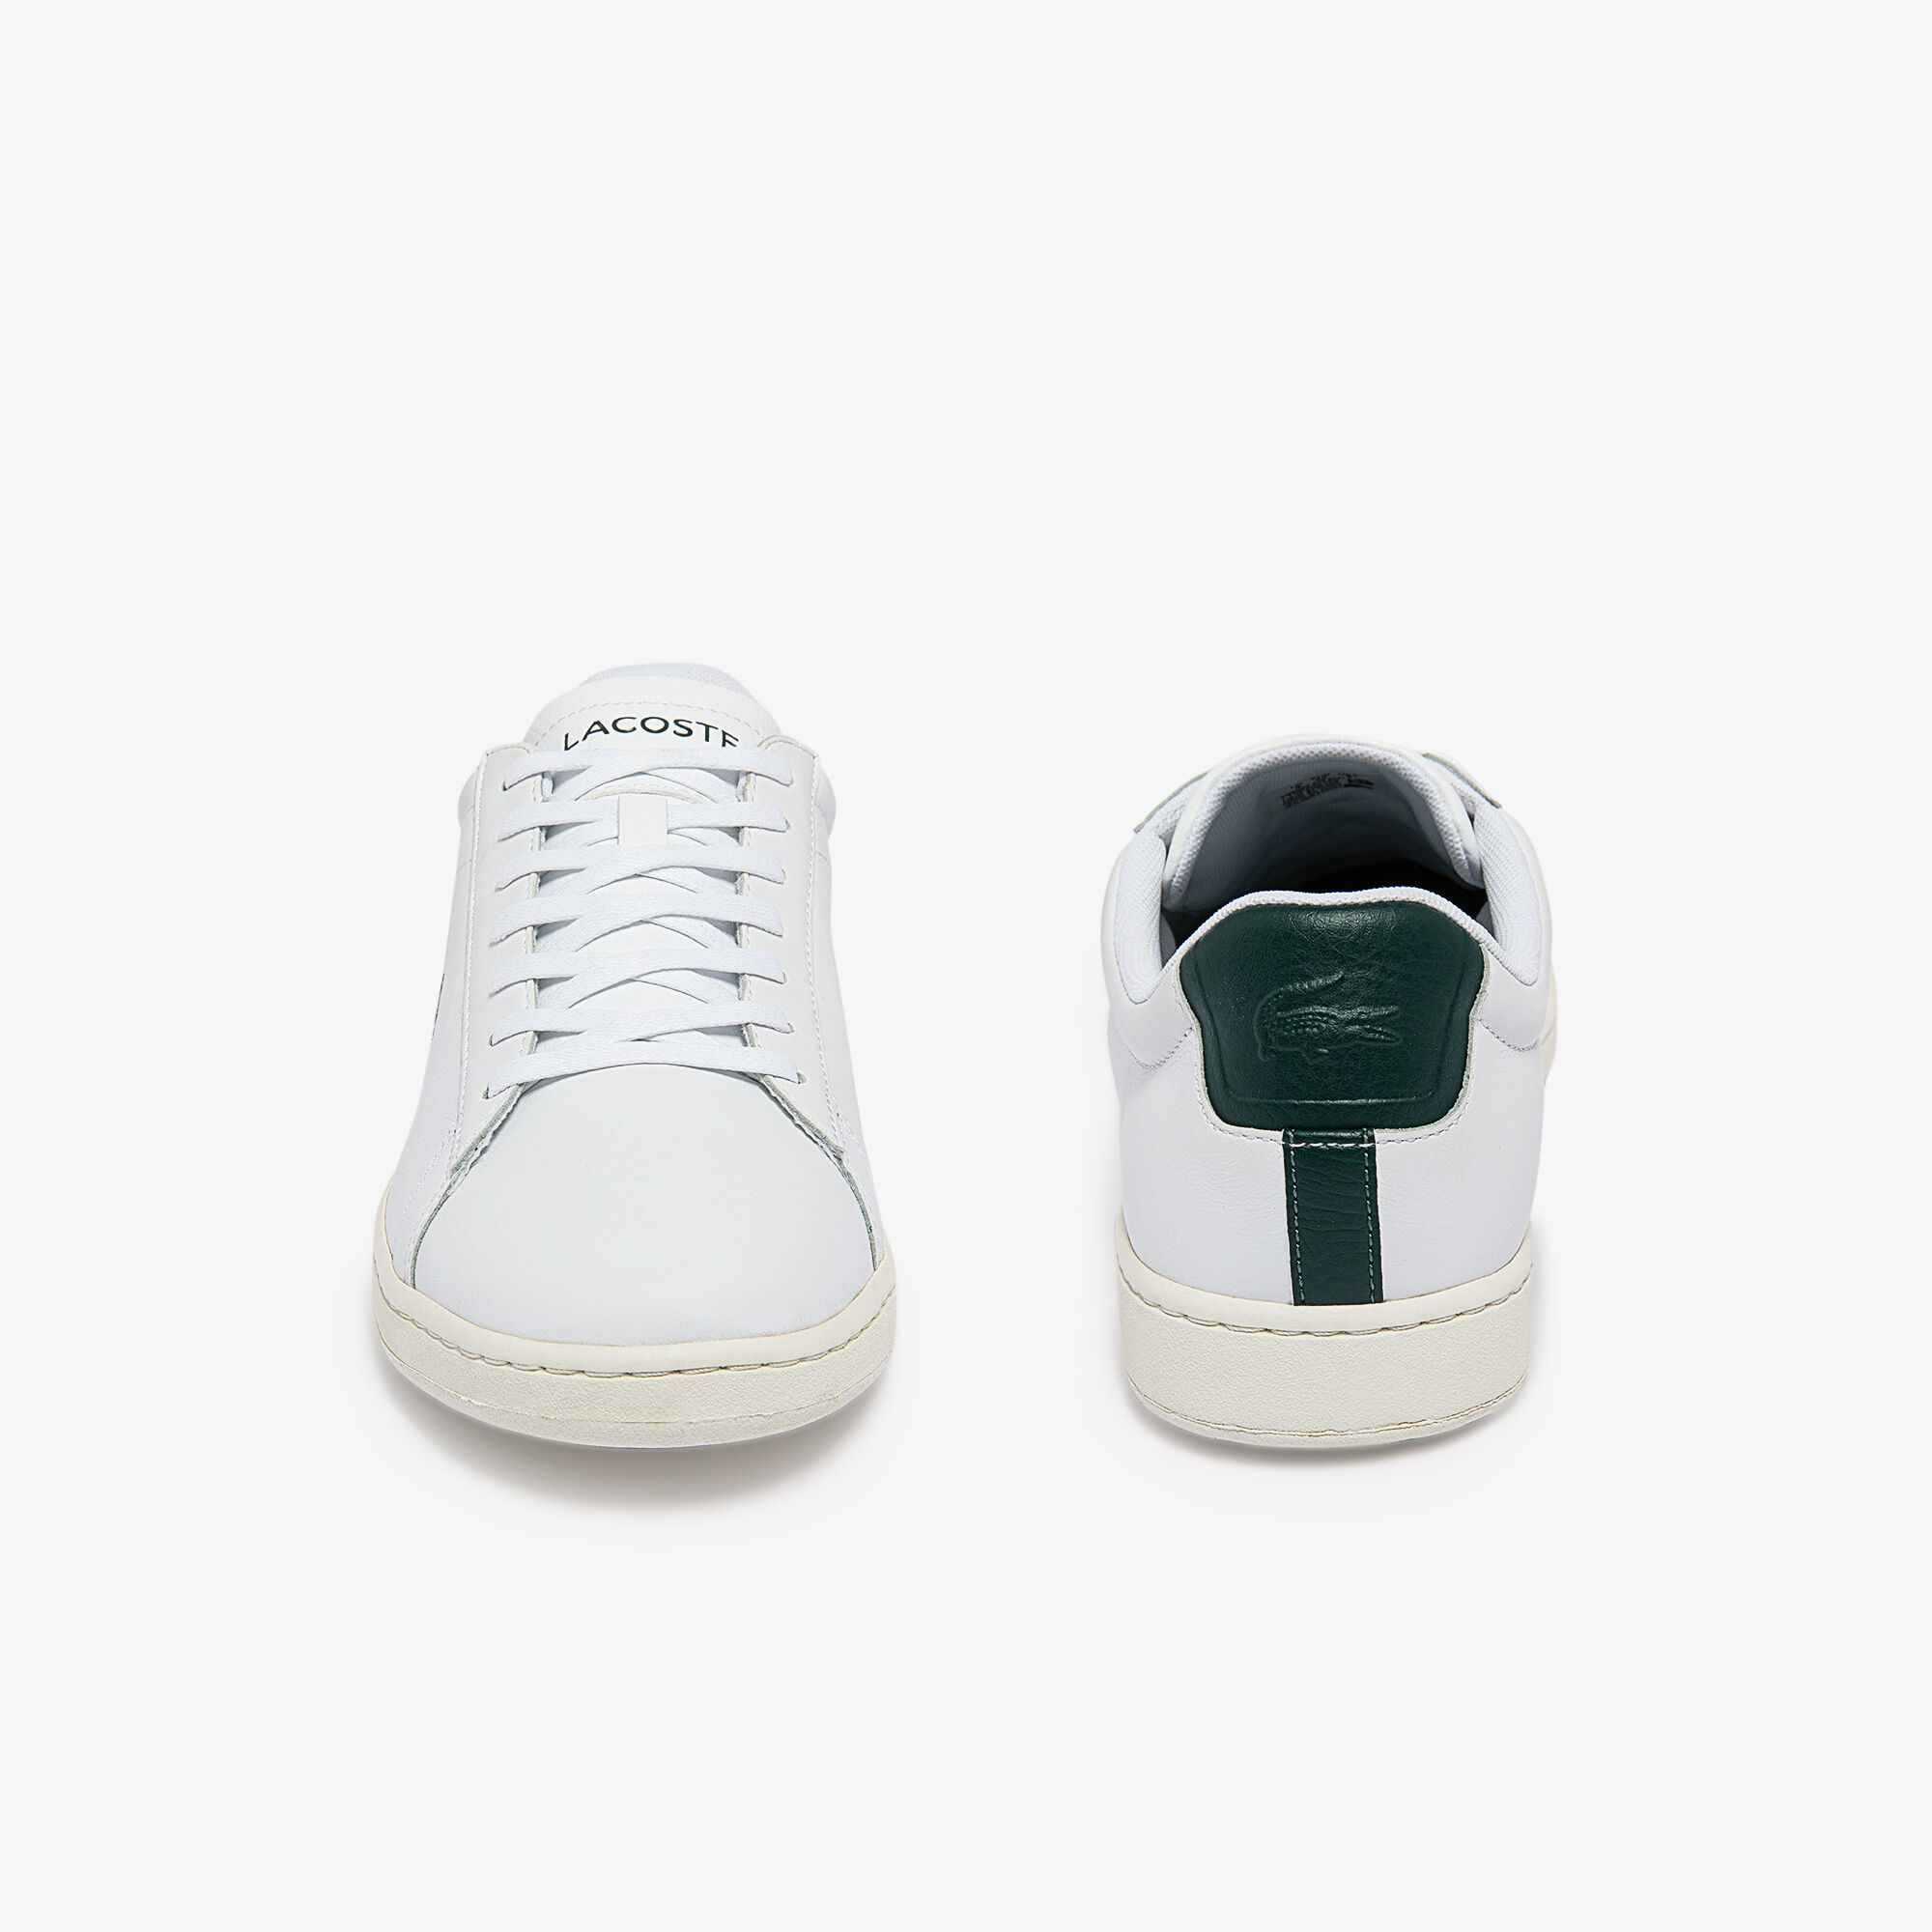 Men's Carnaby Evo Leather Accent Trainers